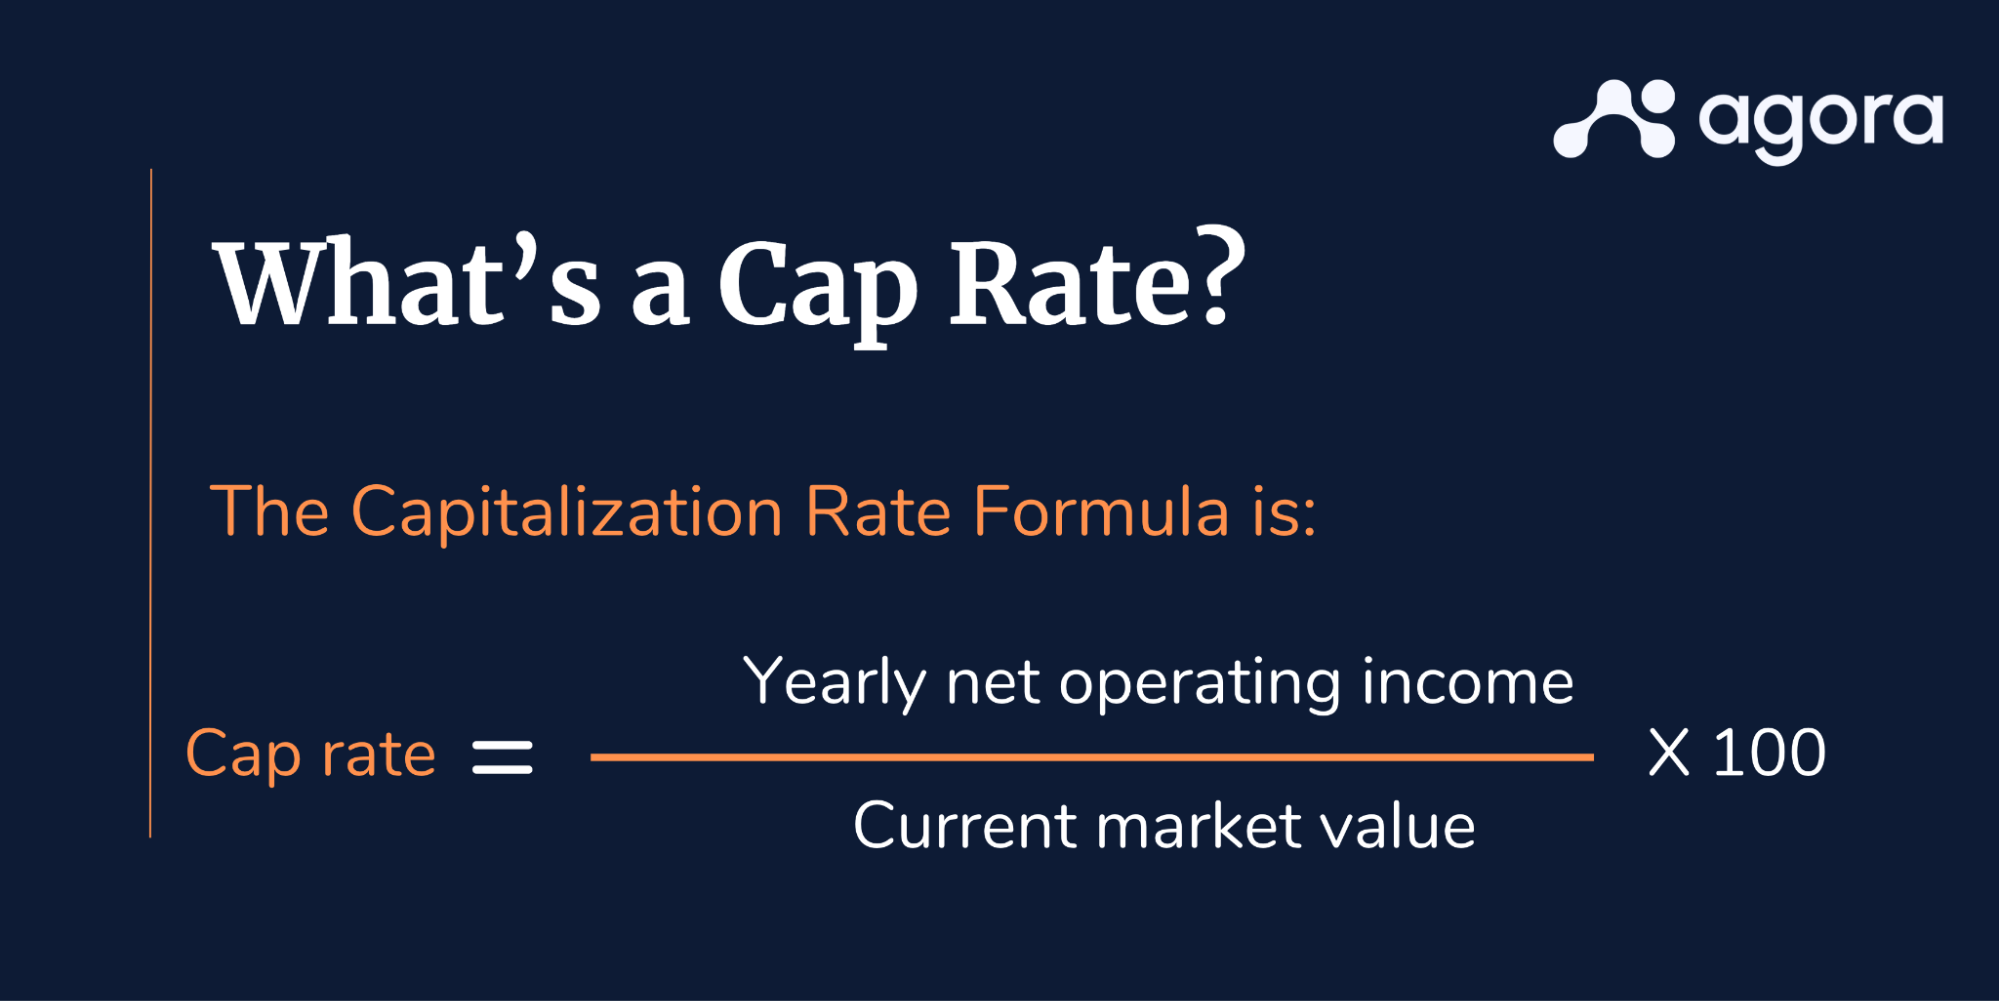 What's a cap rate?